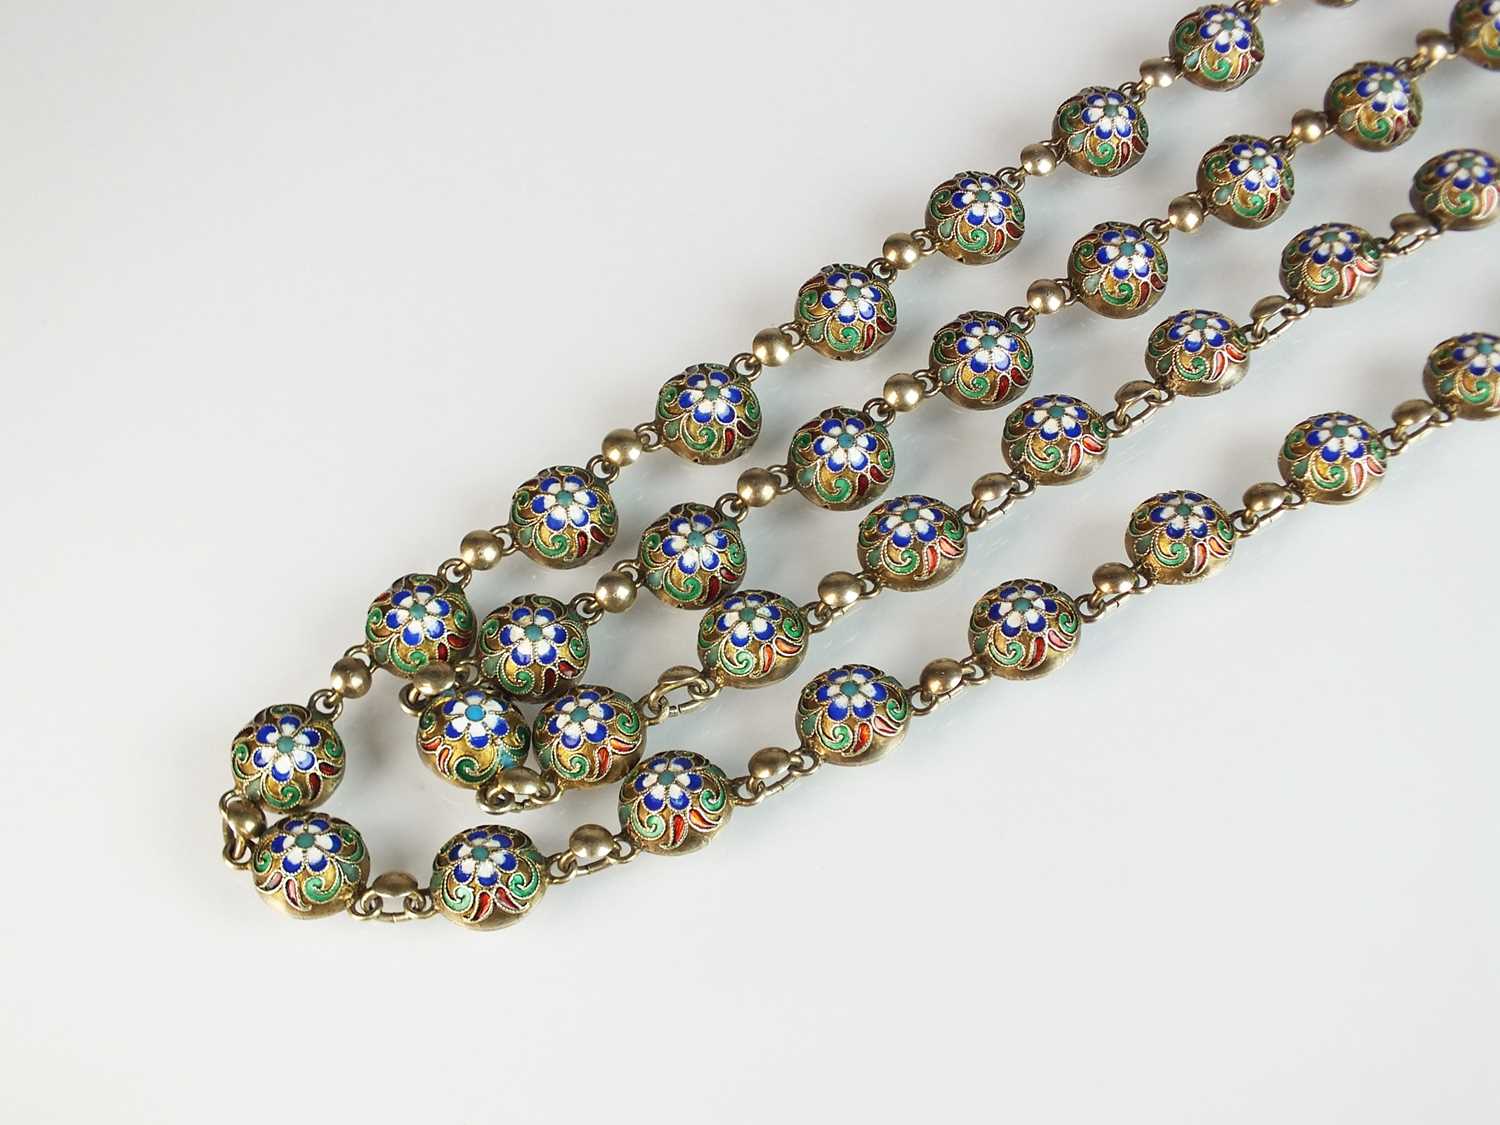 A Russian silver and enamel chain necklace